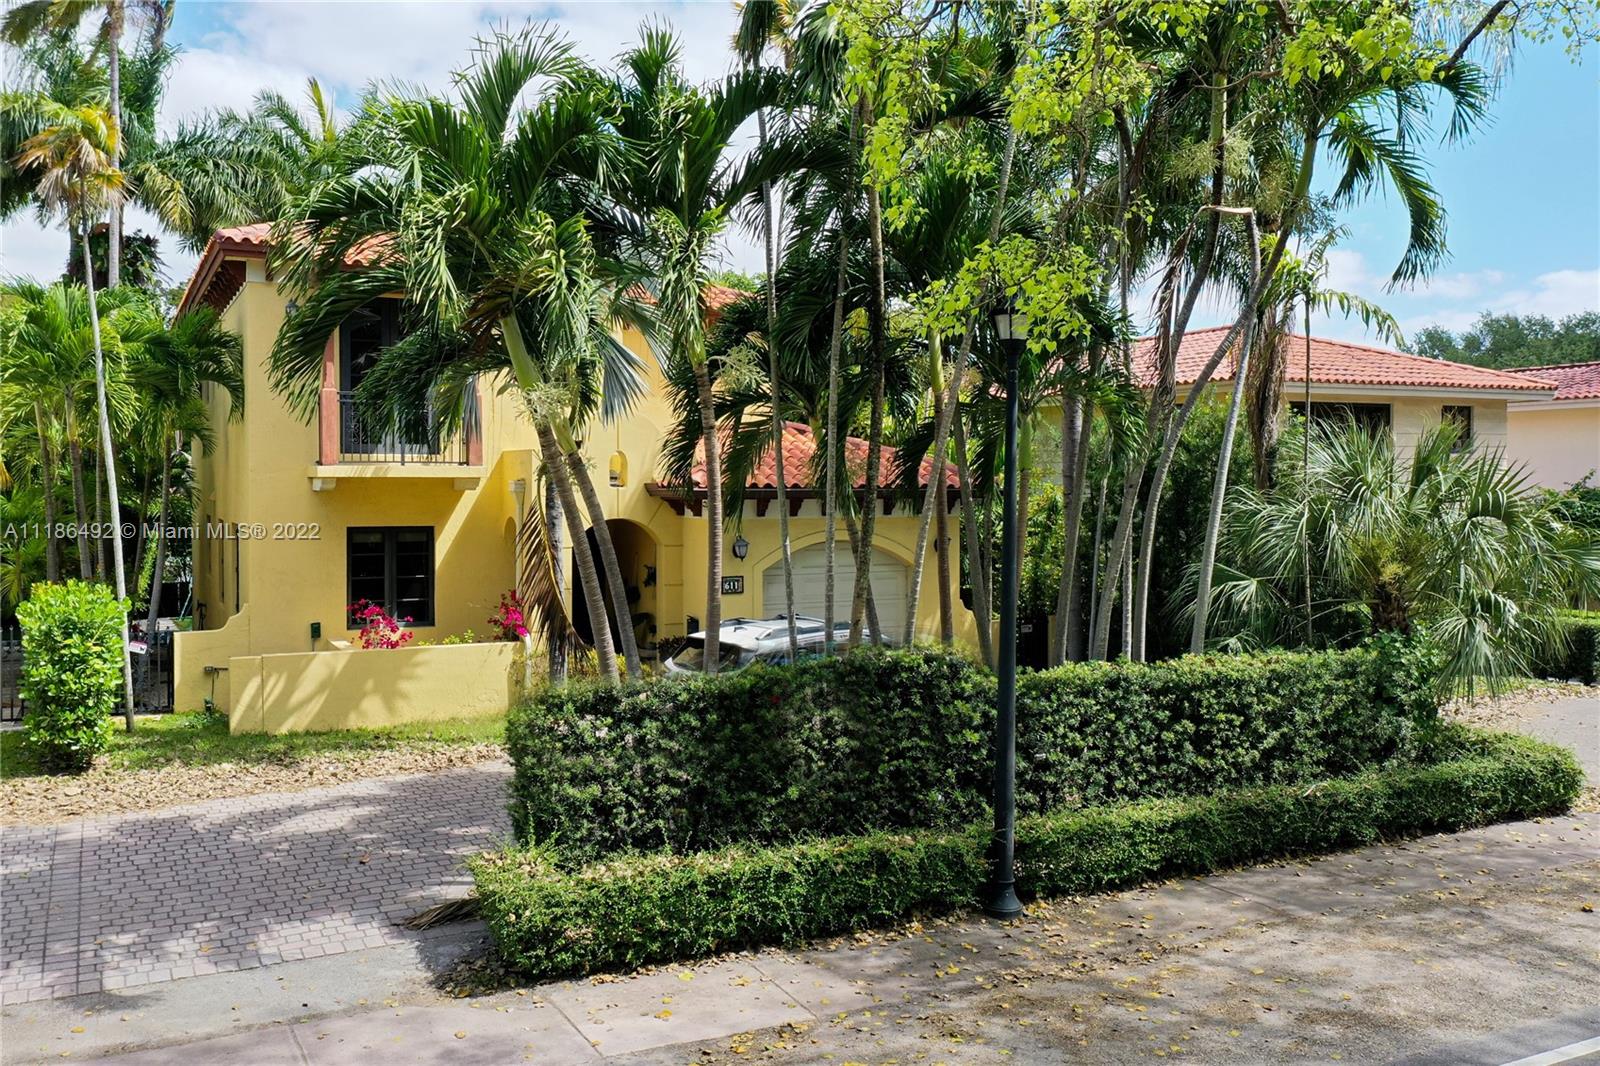 Photo 1 of 611 Bird Rd in Coral Gables - MLS A11186492